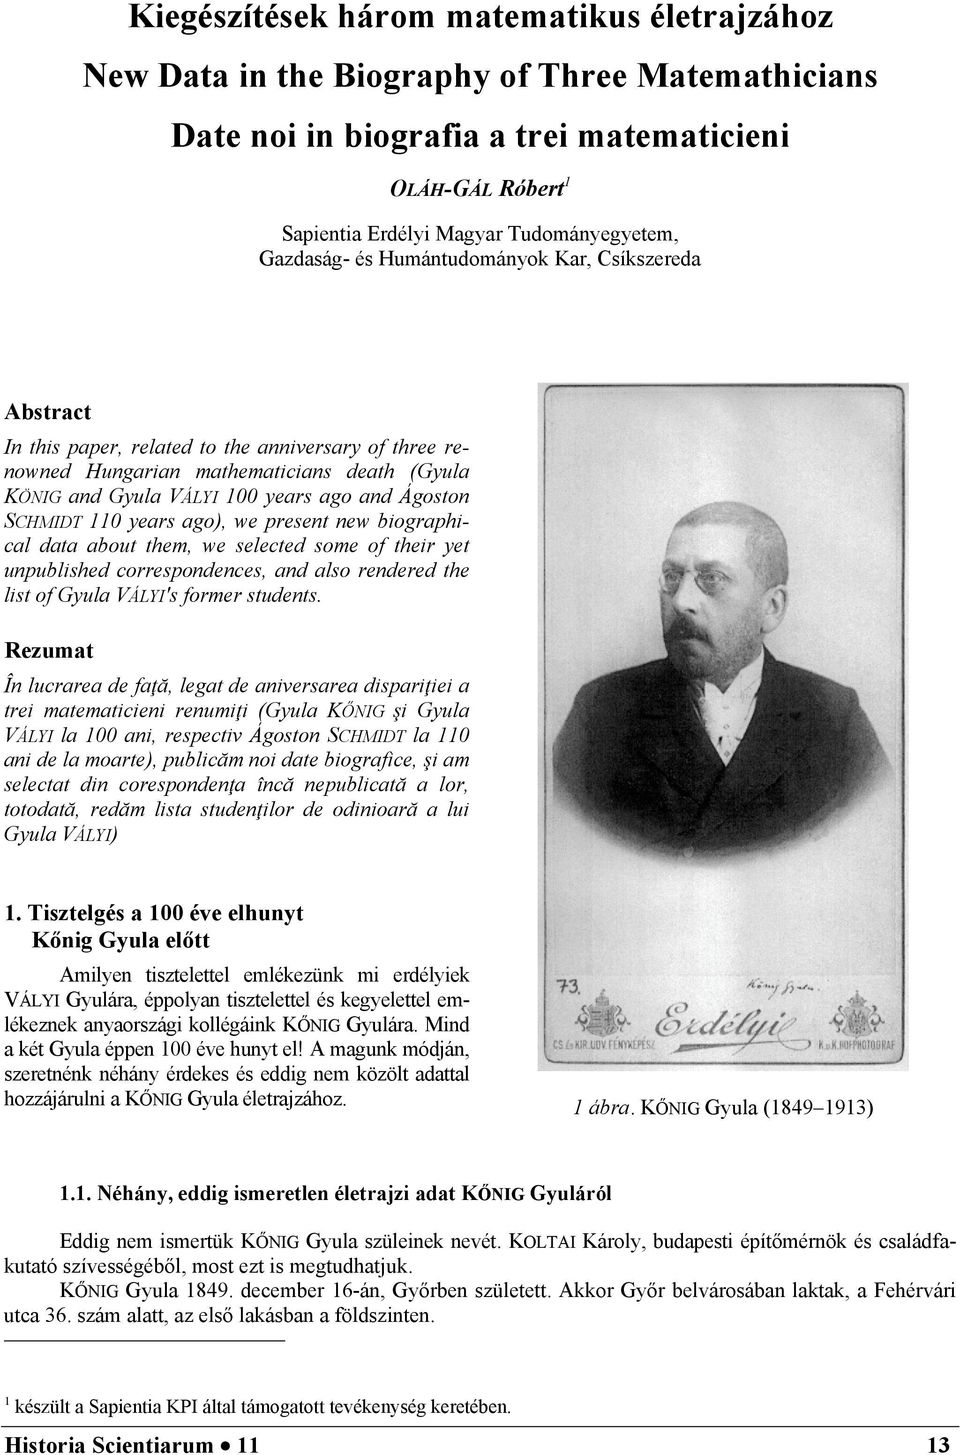 Ágoston SCHMIDT 110 years ago), we present new biographical data about them, we selected some of their yet unpublished correspondences, and also rendered the list of Gyula VÁLYI's former students.